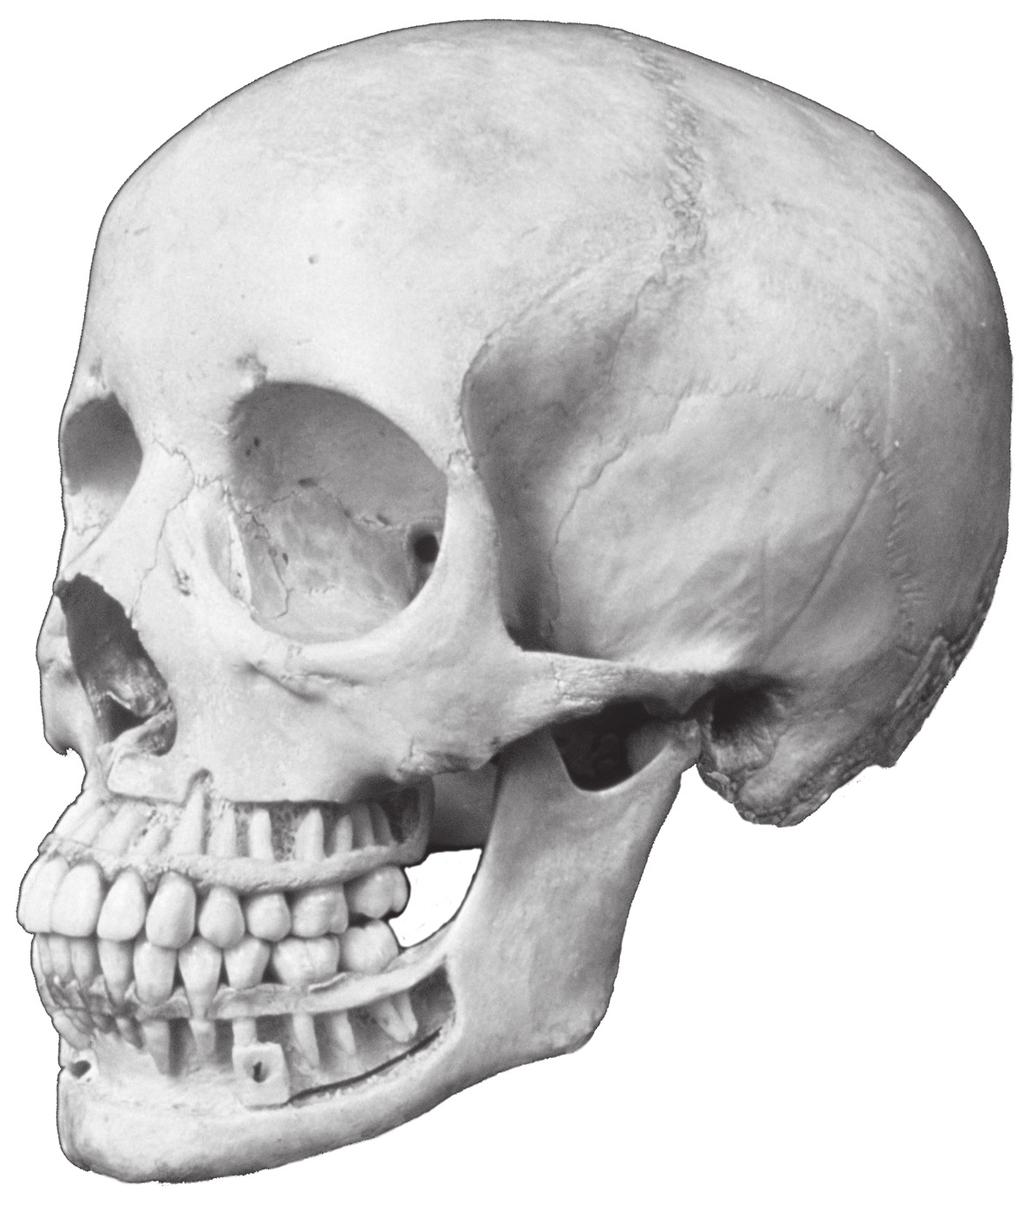 7 4 (a) Fig. 4.1 shows teeth in a human skull. Fig. 4.1 Add label lines and labels to Fig.